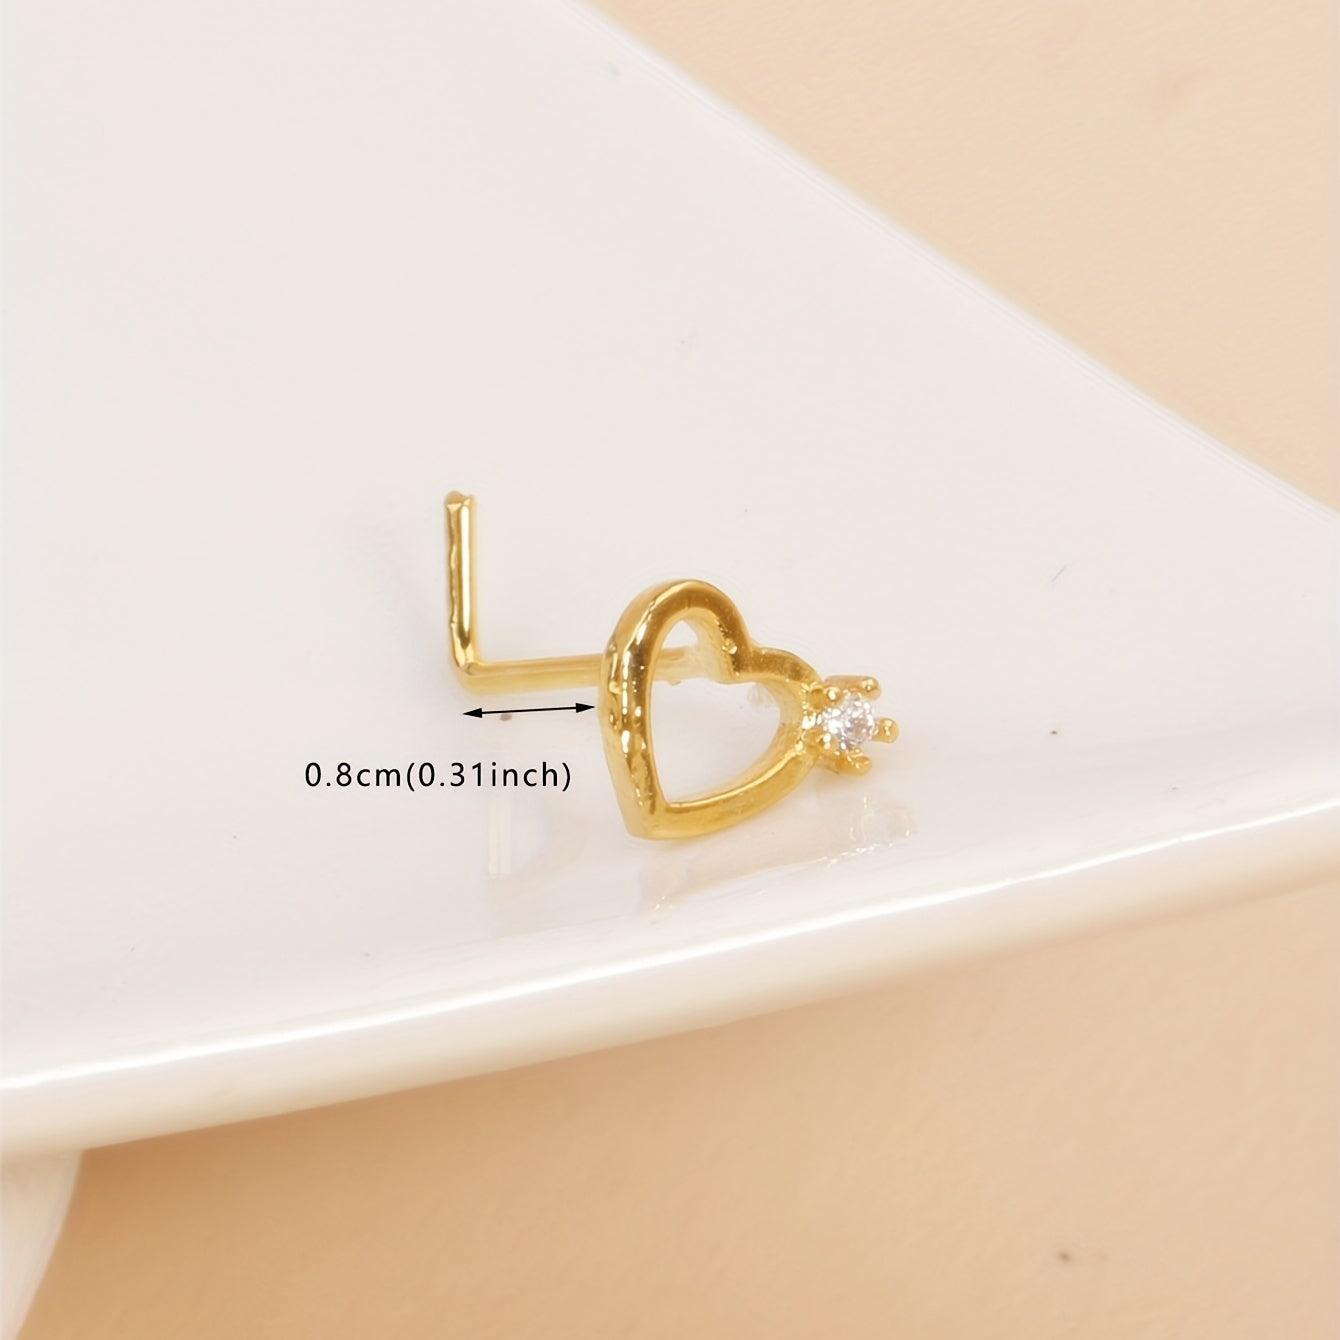 Golden Hollow Out Love Heart Shape Nose Ring Stud For Women Men L Shape Nose Screw Body Piercing Jewelry